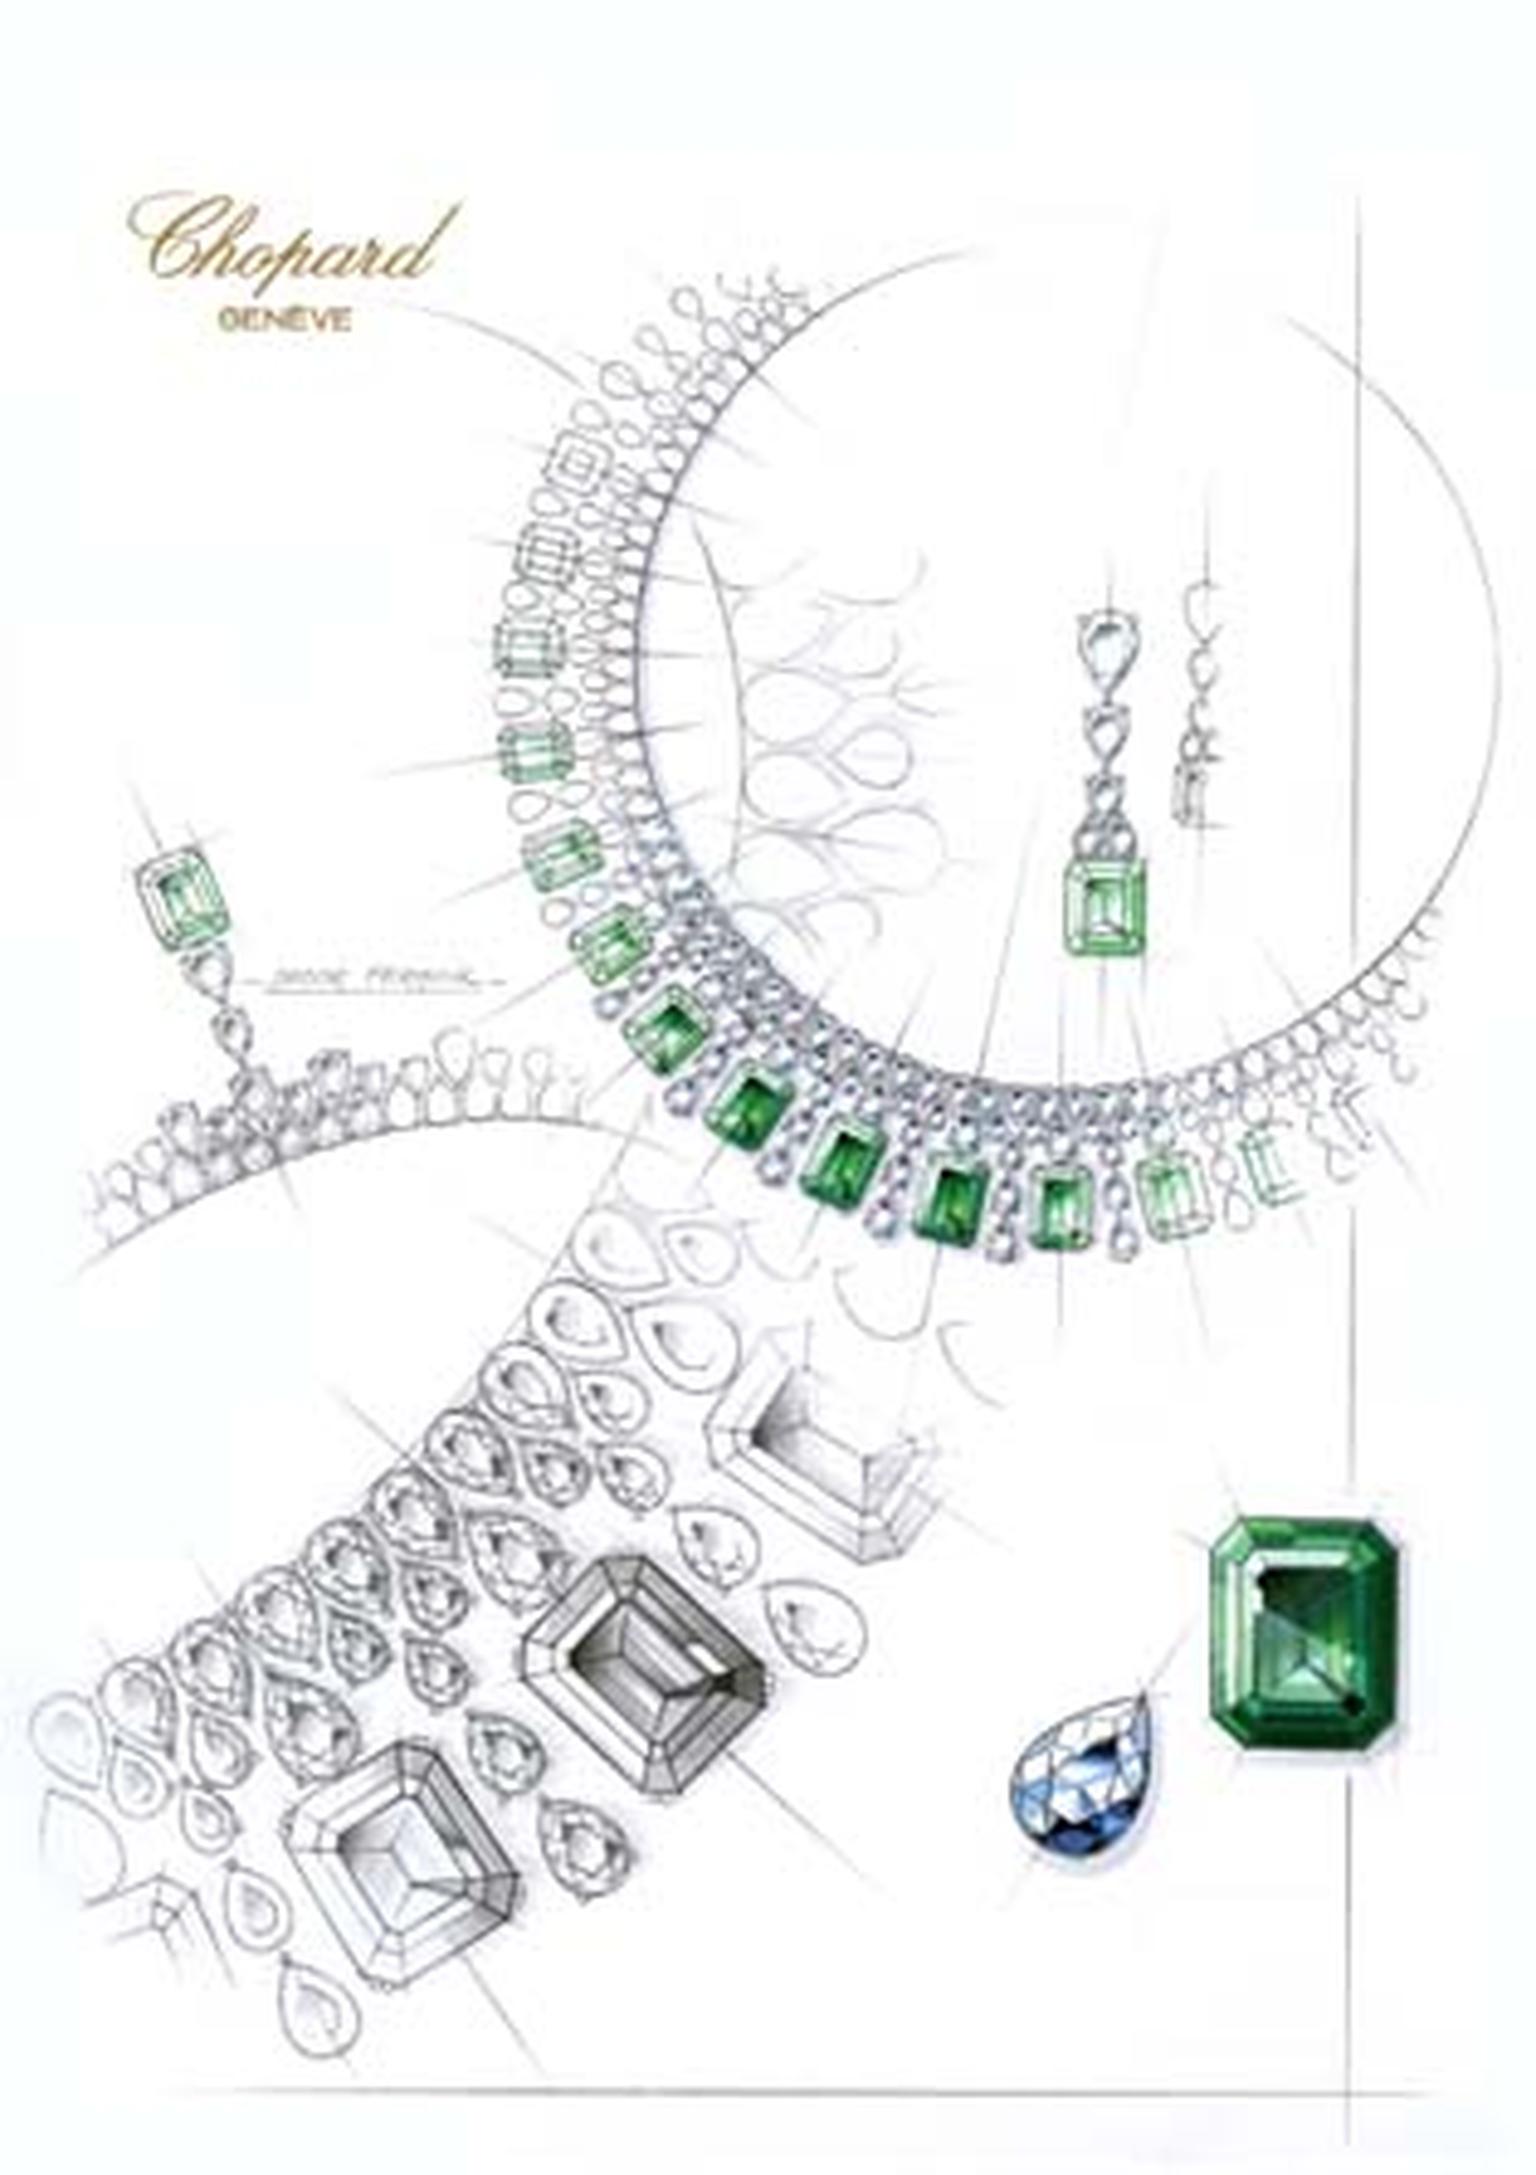 819356-1001 Sketch Emerald Necklace from the Red Carpet Collection 2013Chopard.jpg